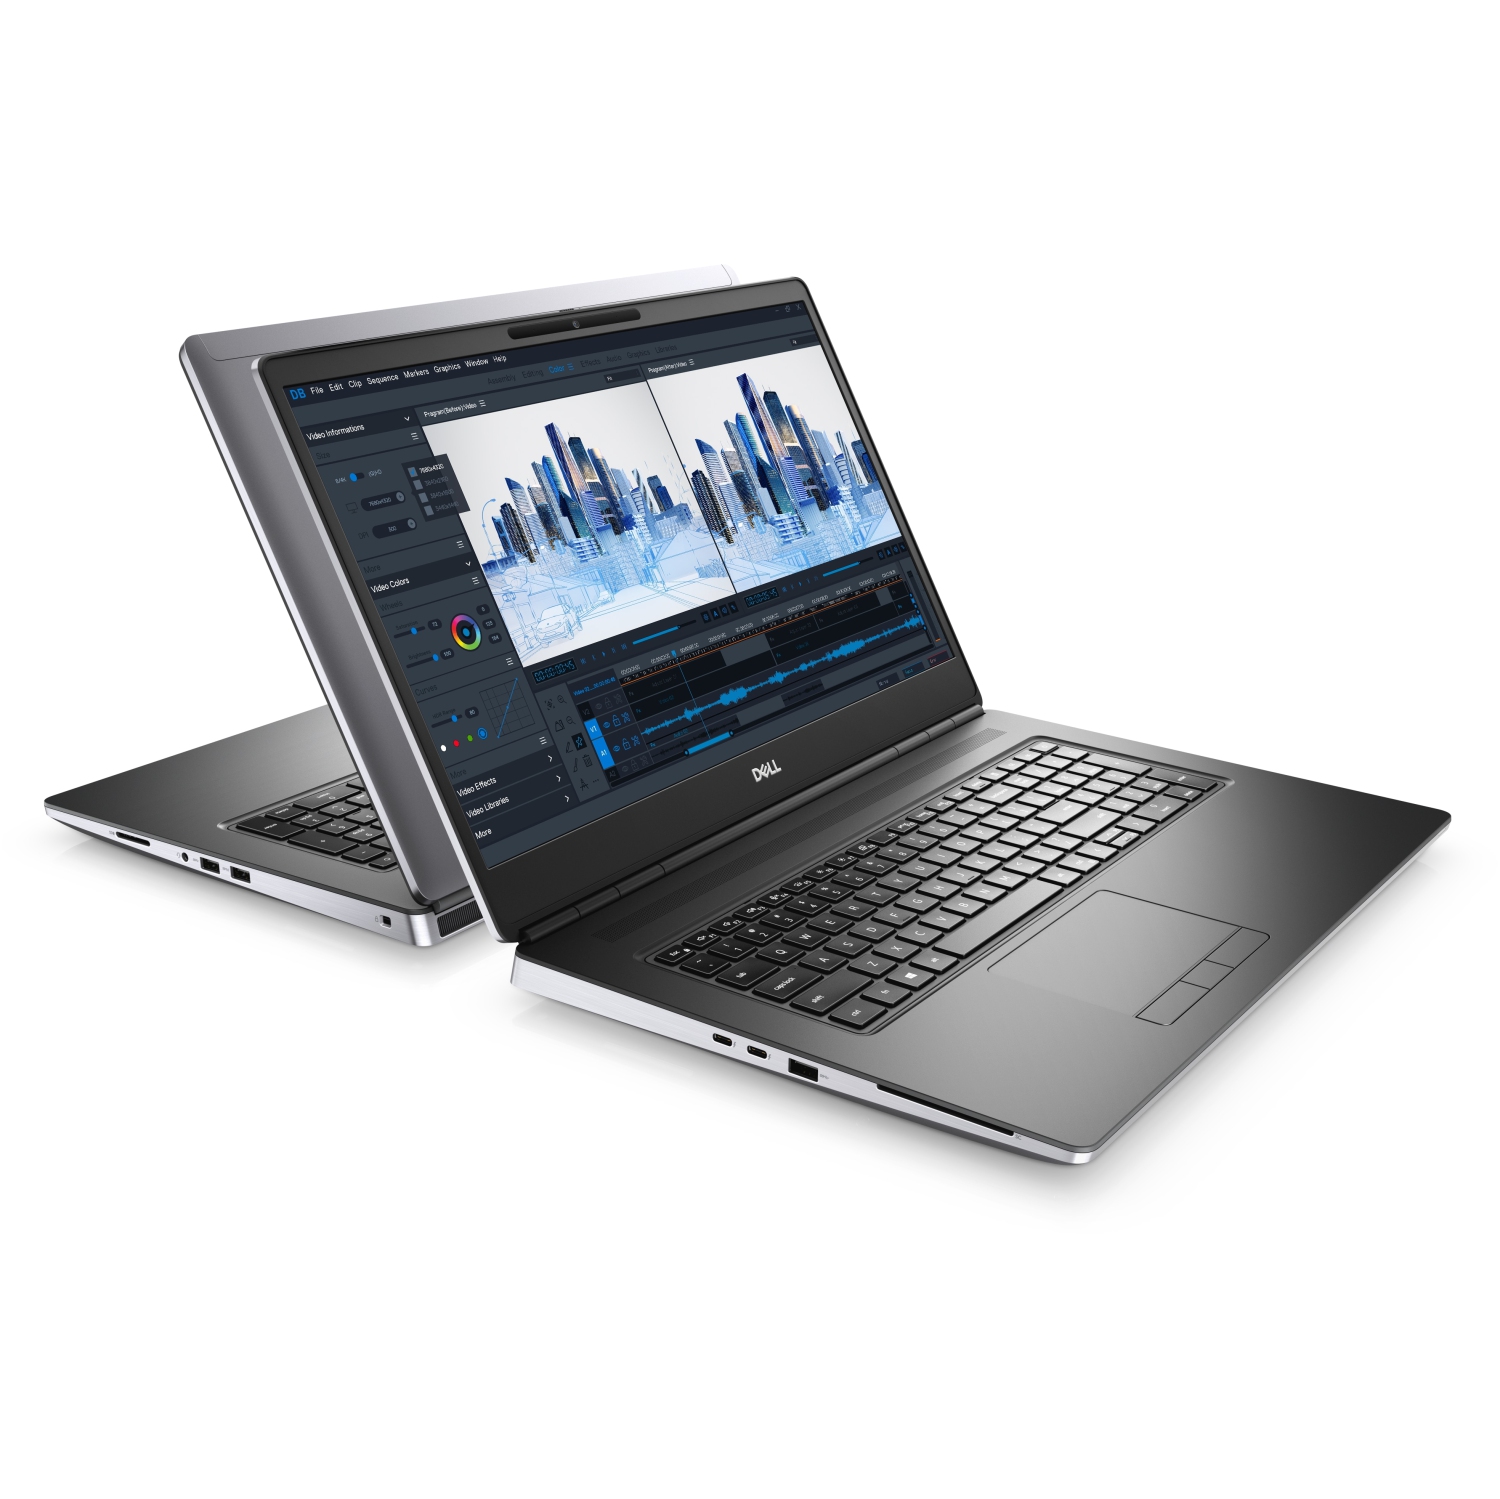 Refurbished (Excellent) - Dell Precision 7000 7760 Workstation Laptop (2021), 17.3" FHD, Core i9, 1TB SSD, 16GB RAM, RTX A5000, 8 Cores @ 5 GHz, 11th Gen CPU Certified